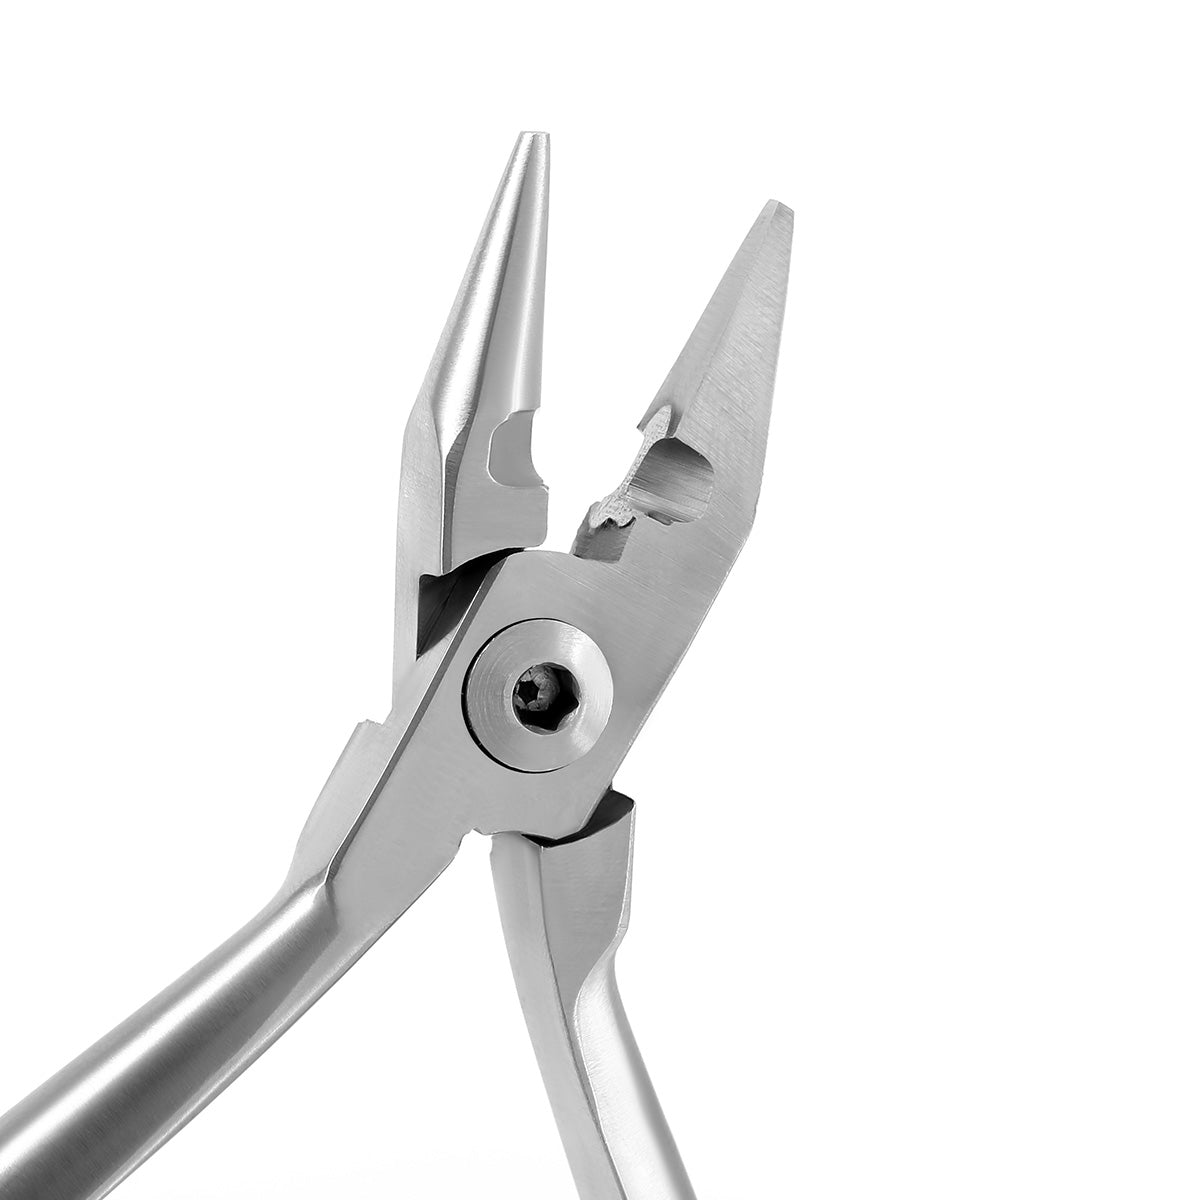 Orthodontic Light Wire Bending Plier with Cutting TC - azdentall.com